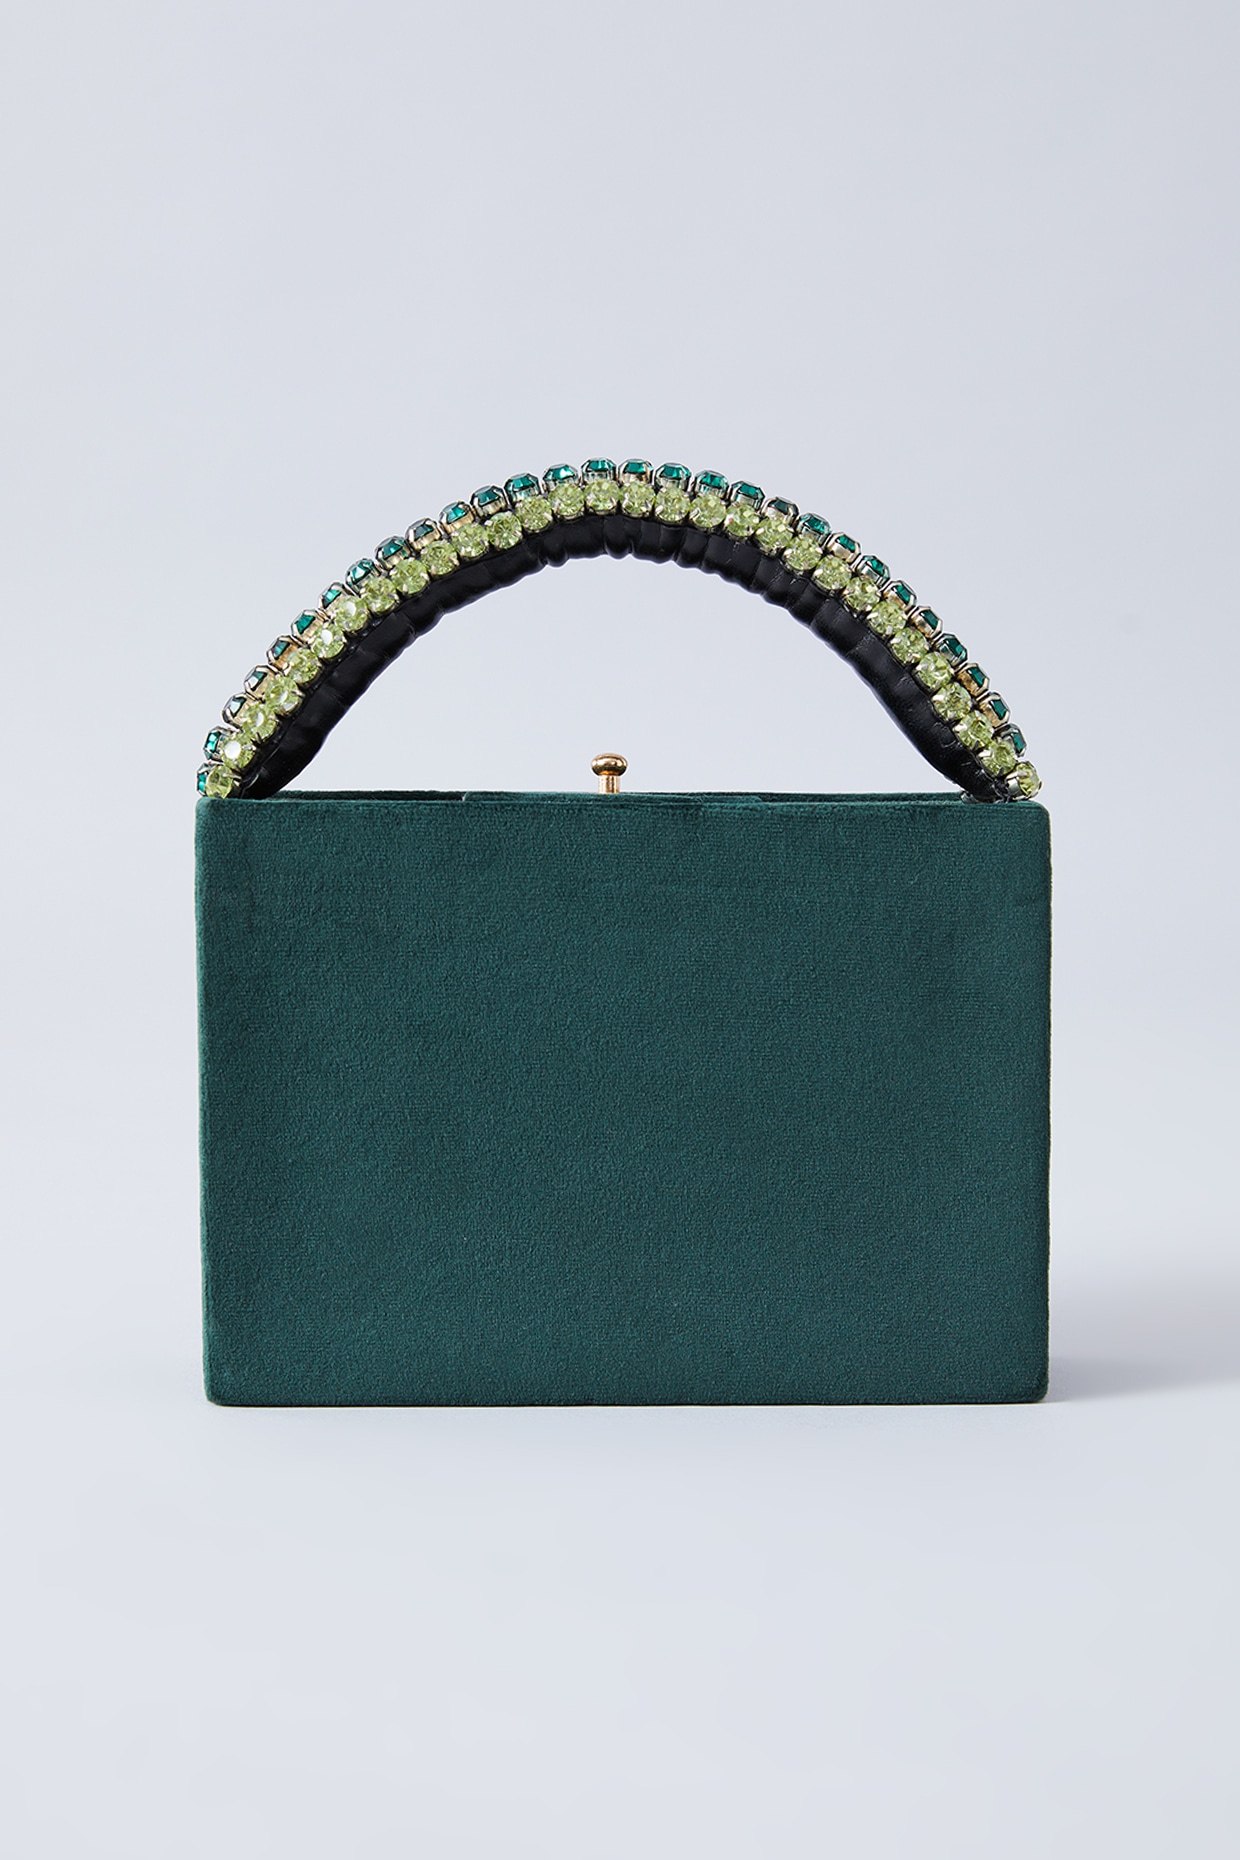 Jacquemus Le Chiquito Mini Suede Bag in Green | Lyst